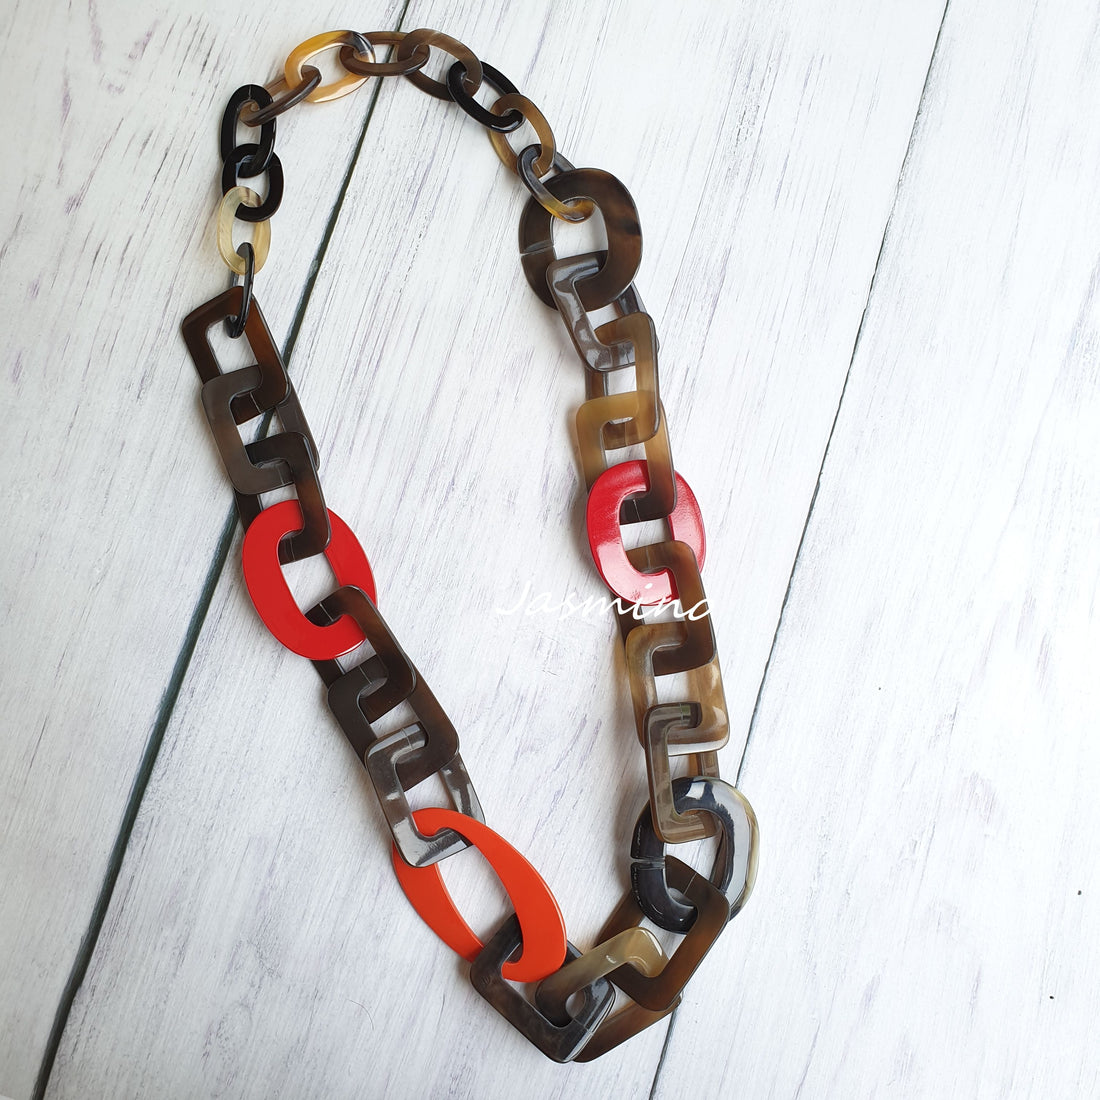 Jasmino unique handmade Vintage rectangle chain necklace features brown and red in natural buffalo horn for women